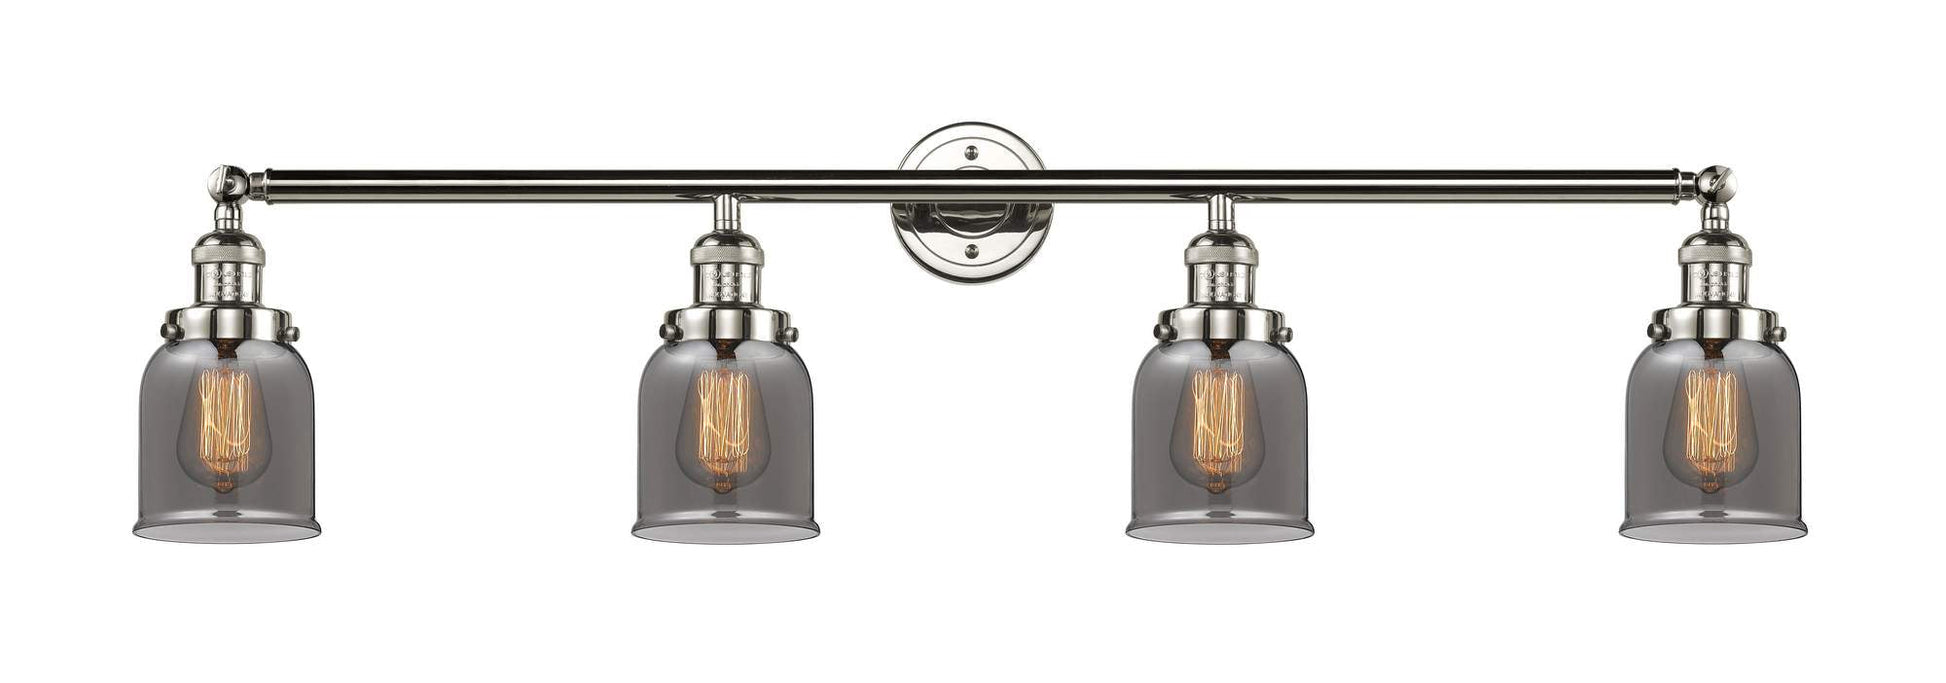 215-PN-G53 4-Light 42" Polished Nickel Bath Vanity Light - Plated Smoke Small Bell Glass - LED Bulb - Dimmensions: 42 x 7 x 9.75 - Glass Up or Down: Yes